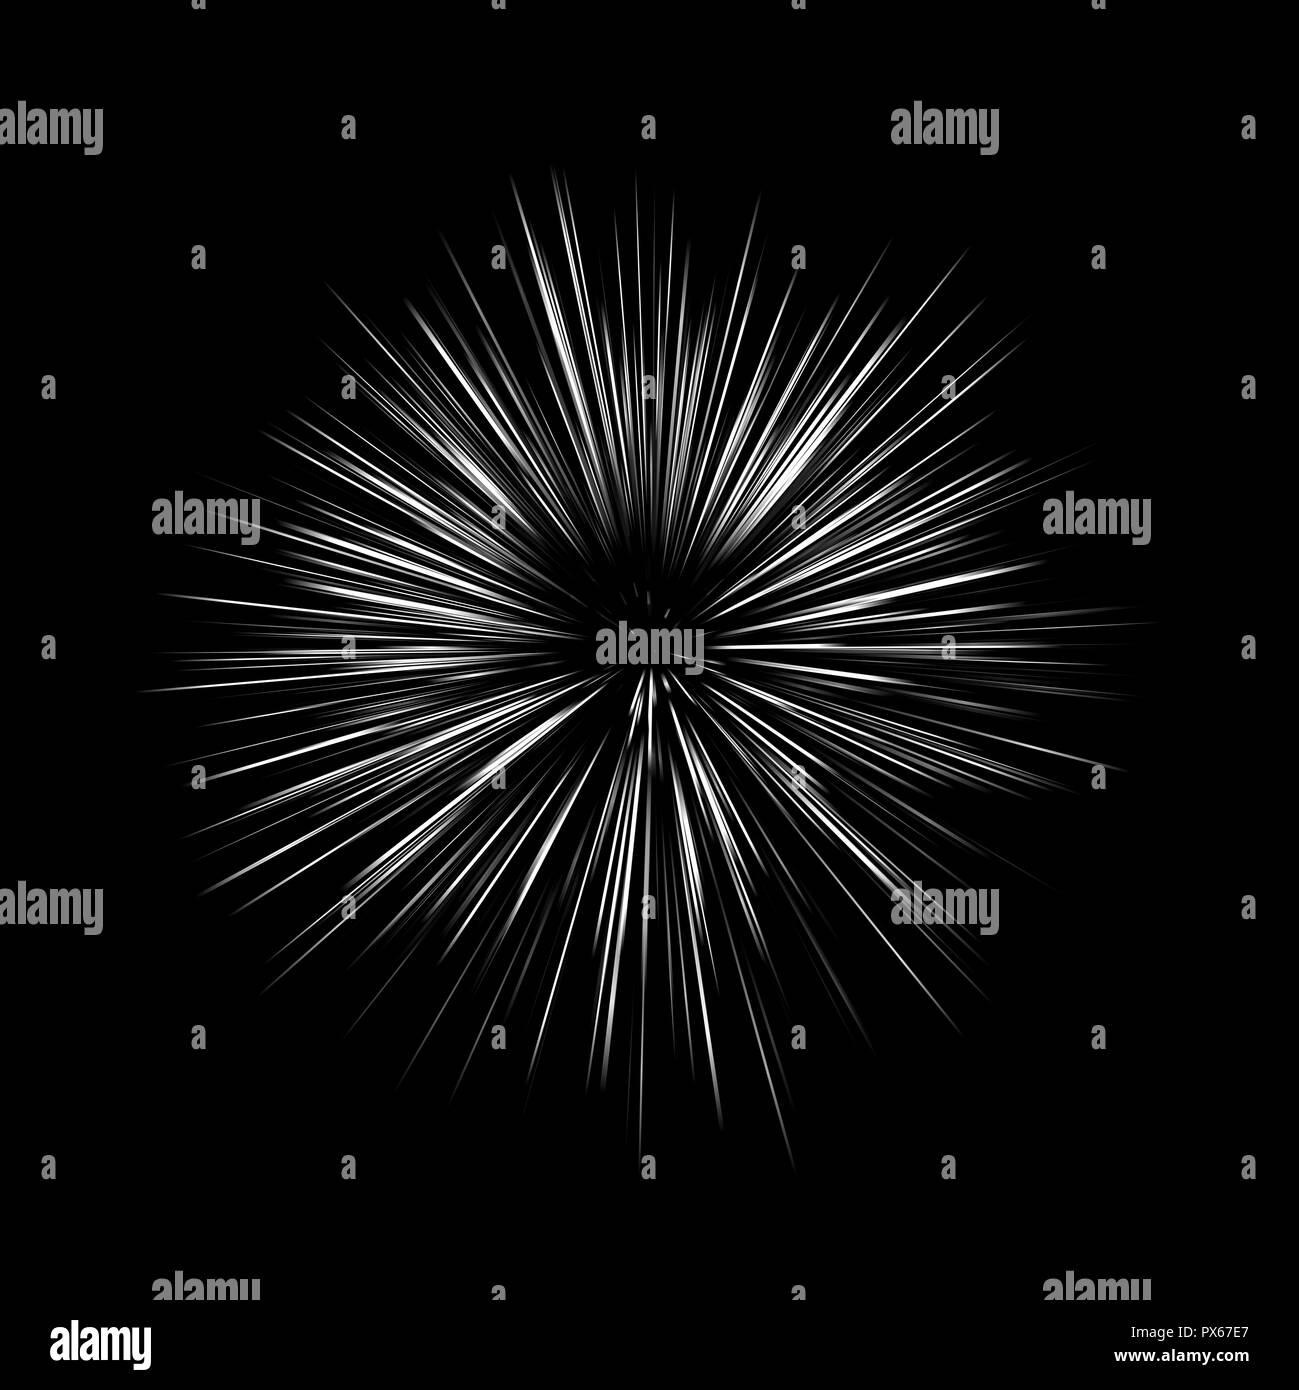 Abstract sharp star shaped object isolated on black background, square 3d render illustration Stock Photo